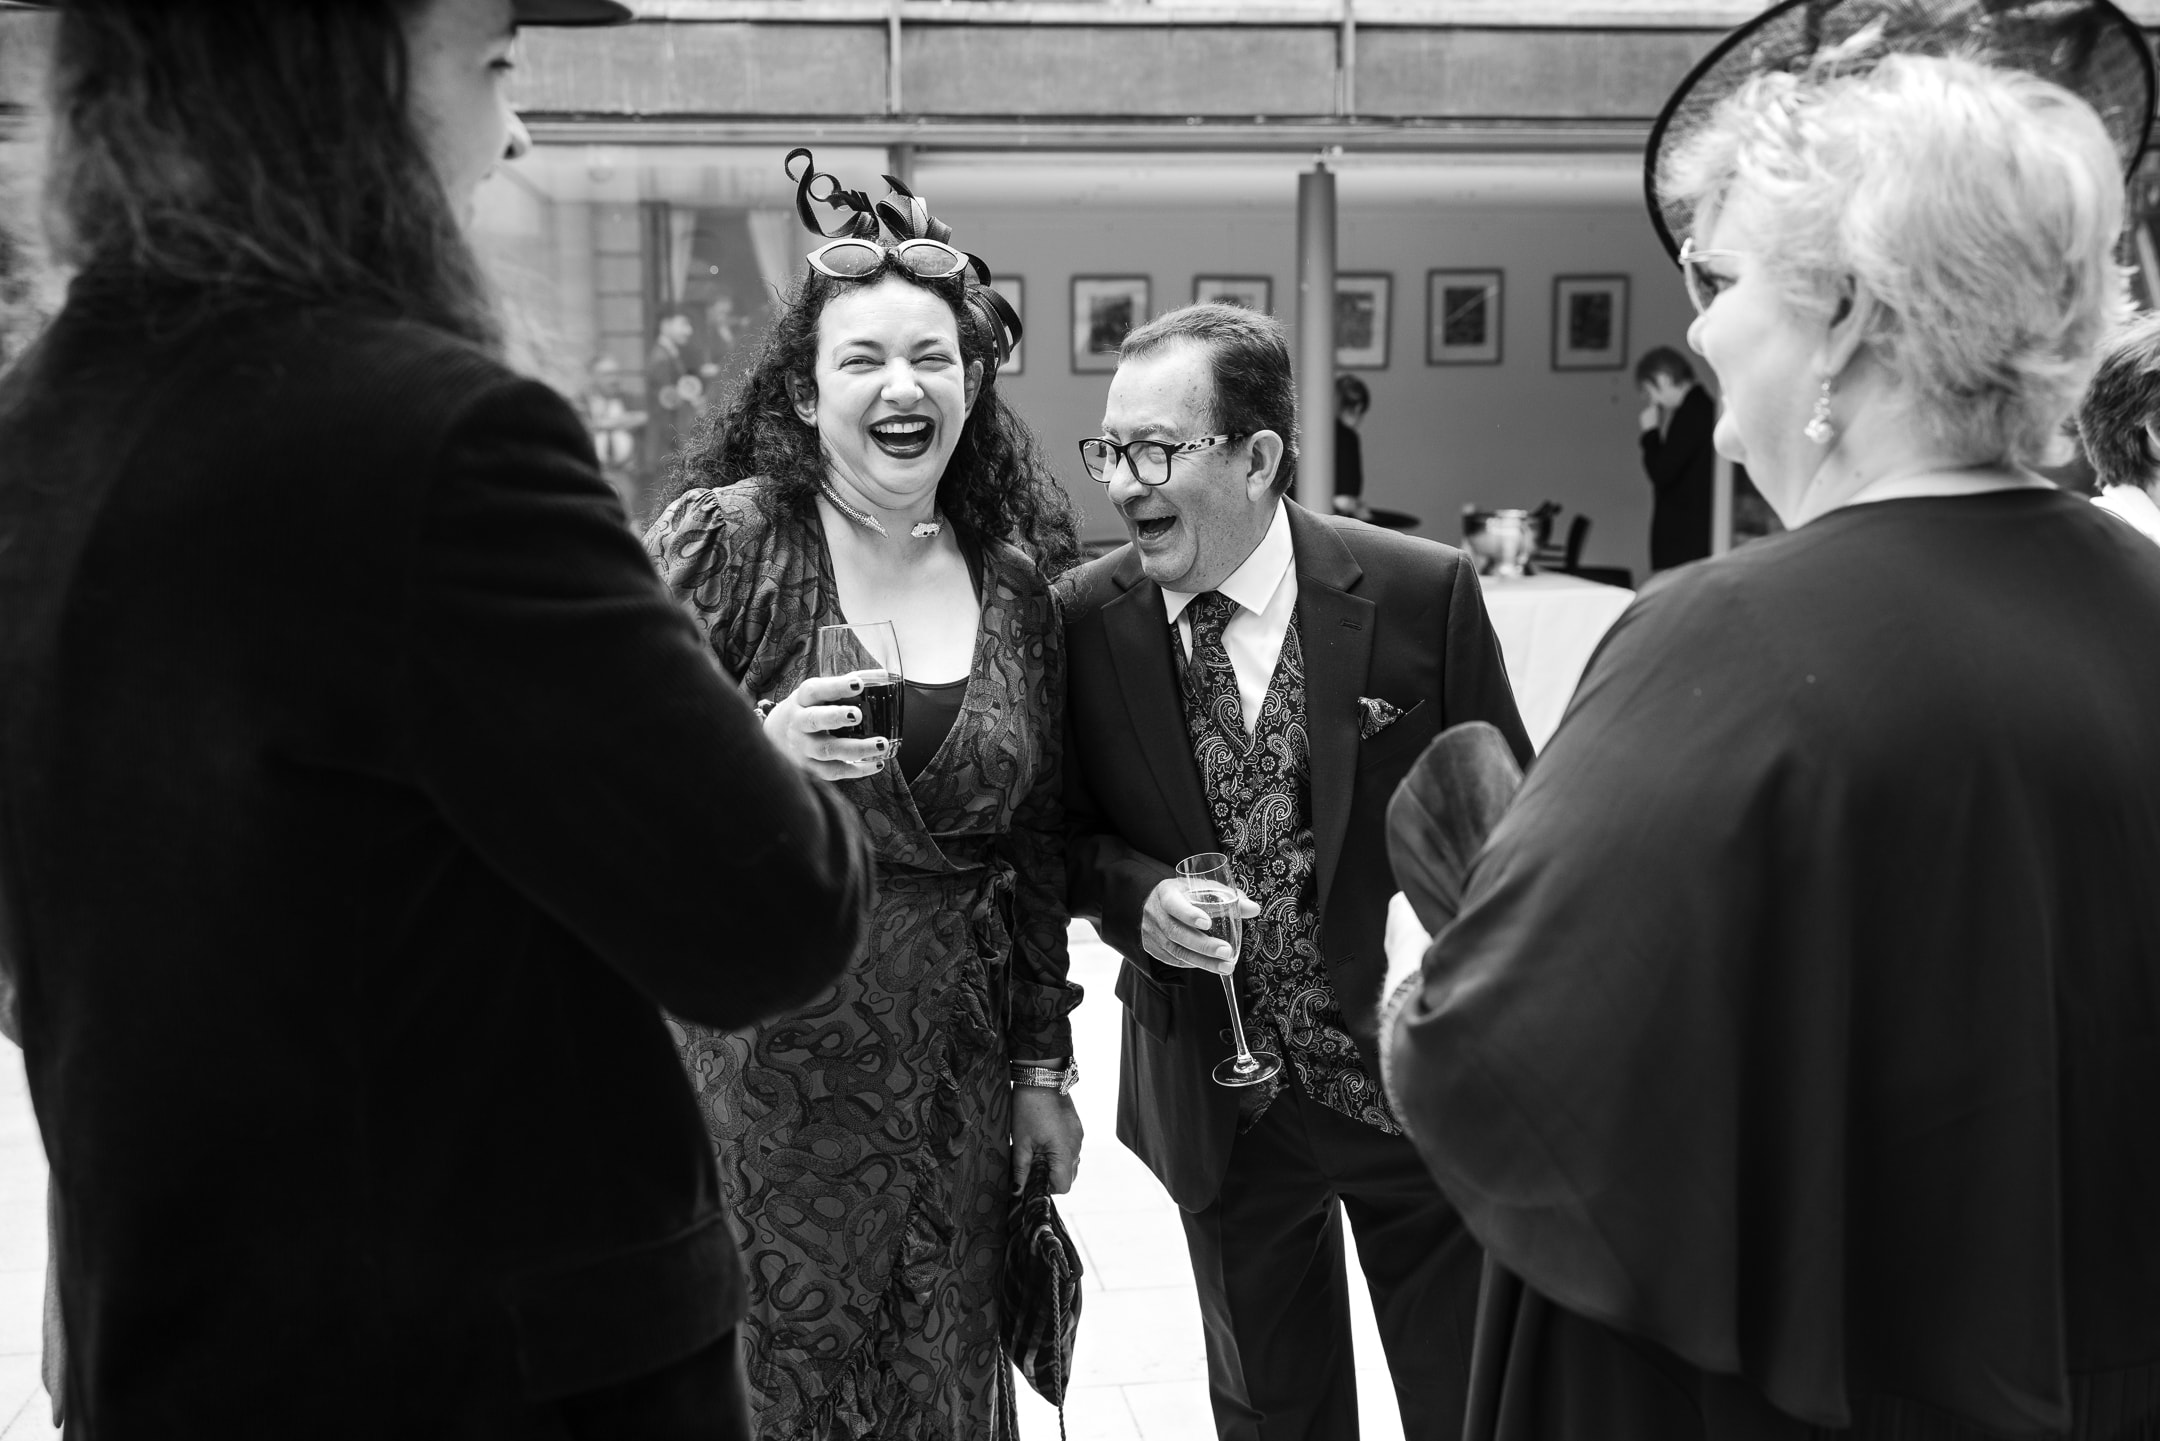 Father of the Bride laughing during drinks reception